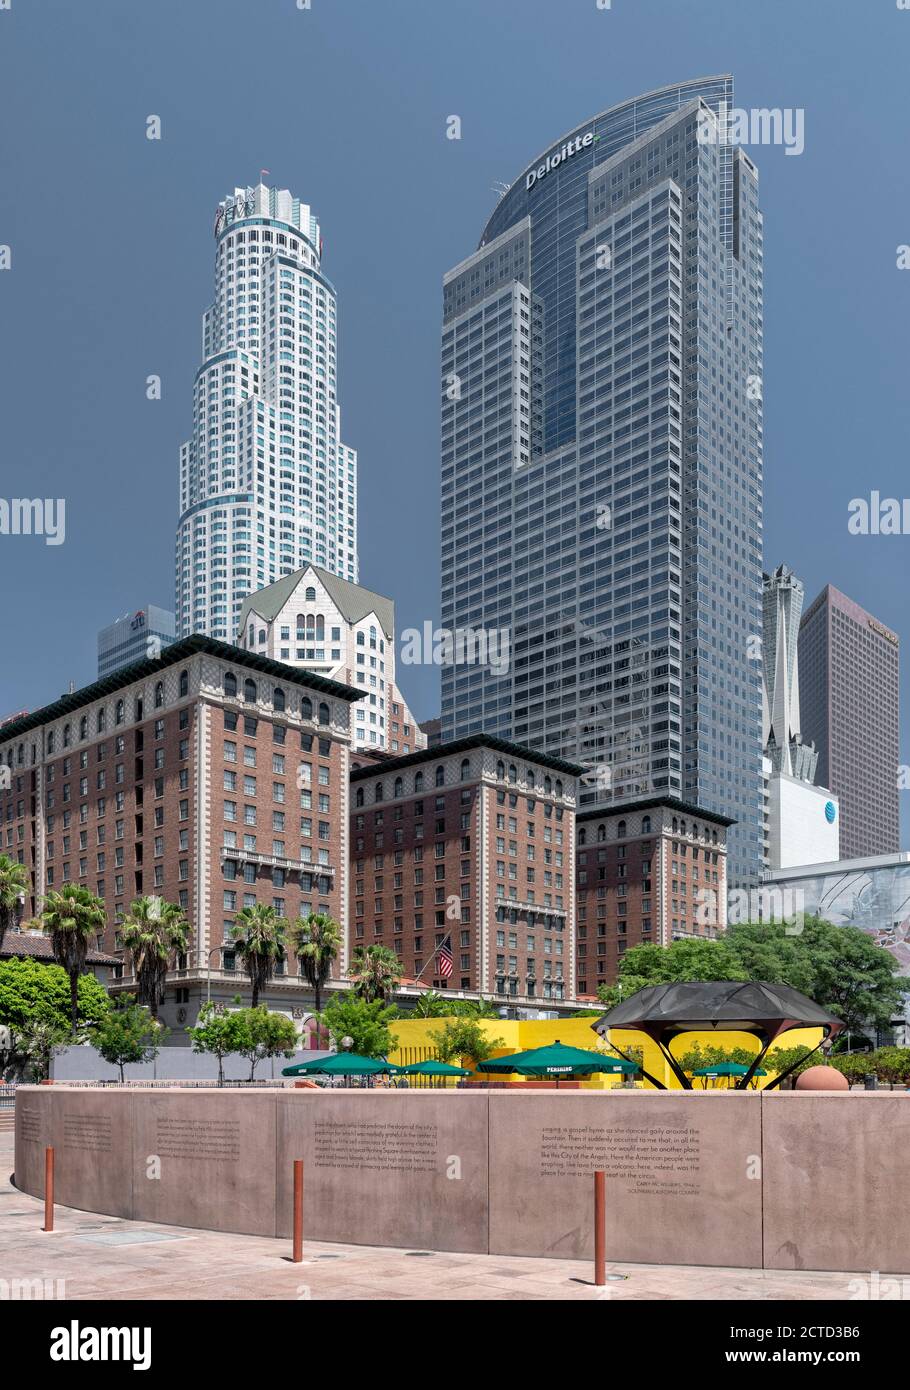 A summer day shot at the entrance of Pershing Square, downtown LA, California, USA.  Building completed in 1991. Stock Photo